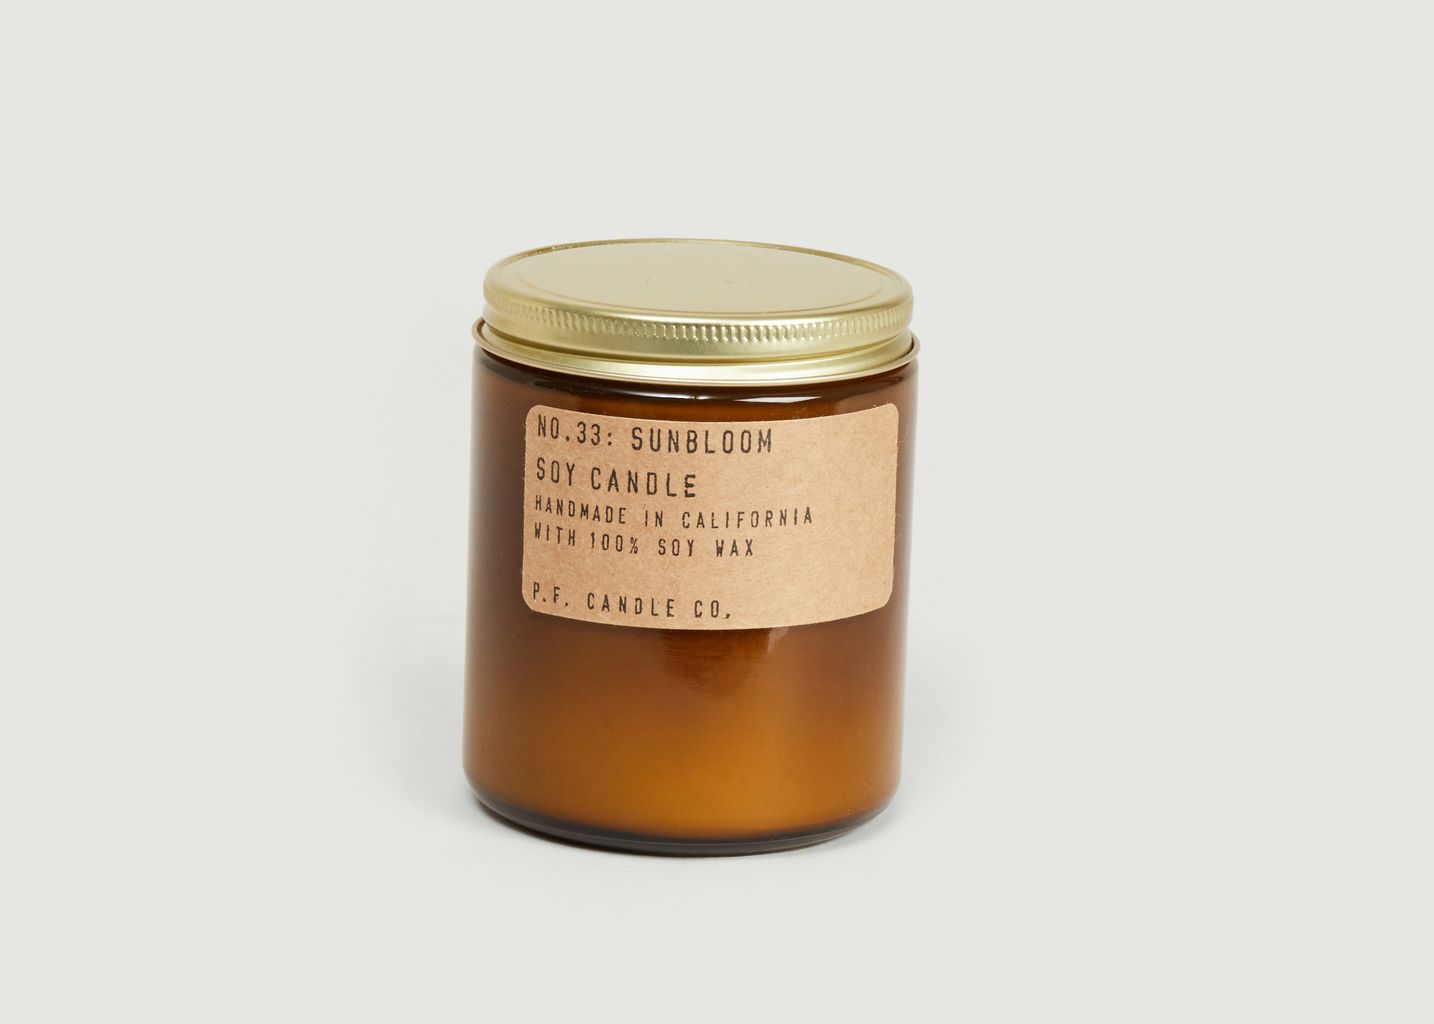 Bougie n°33 Sunbloom - P.F. Candle CO.